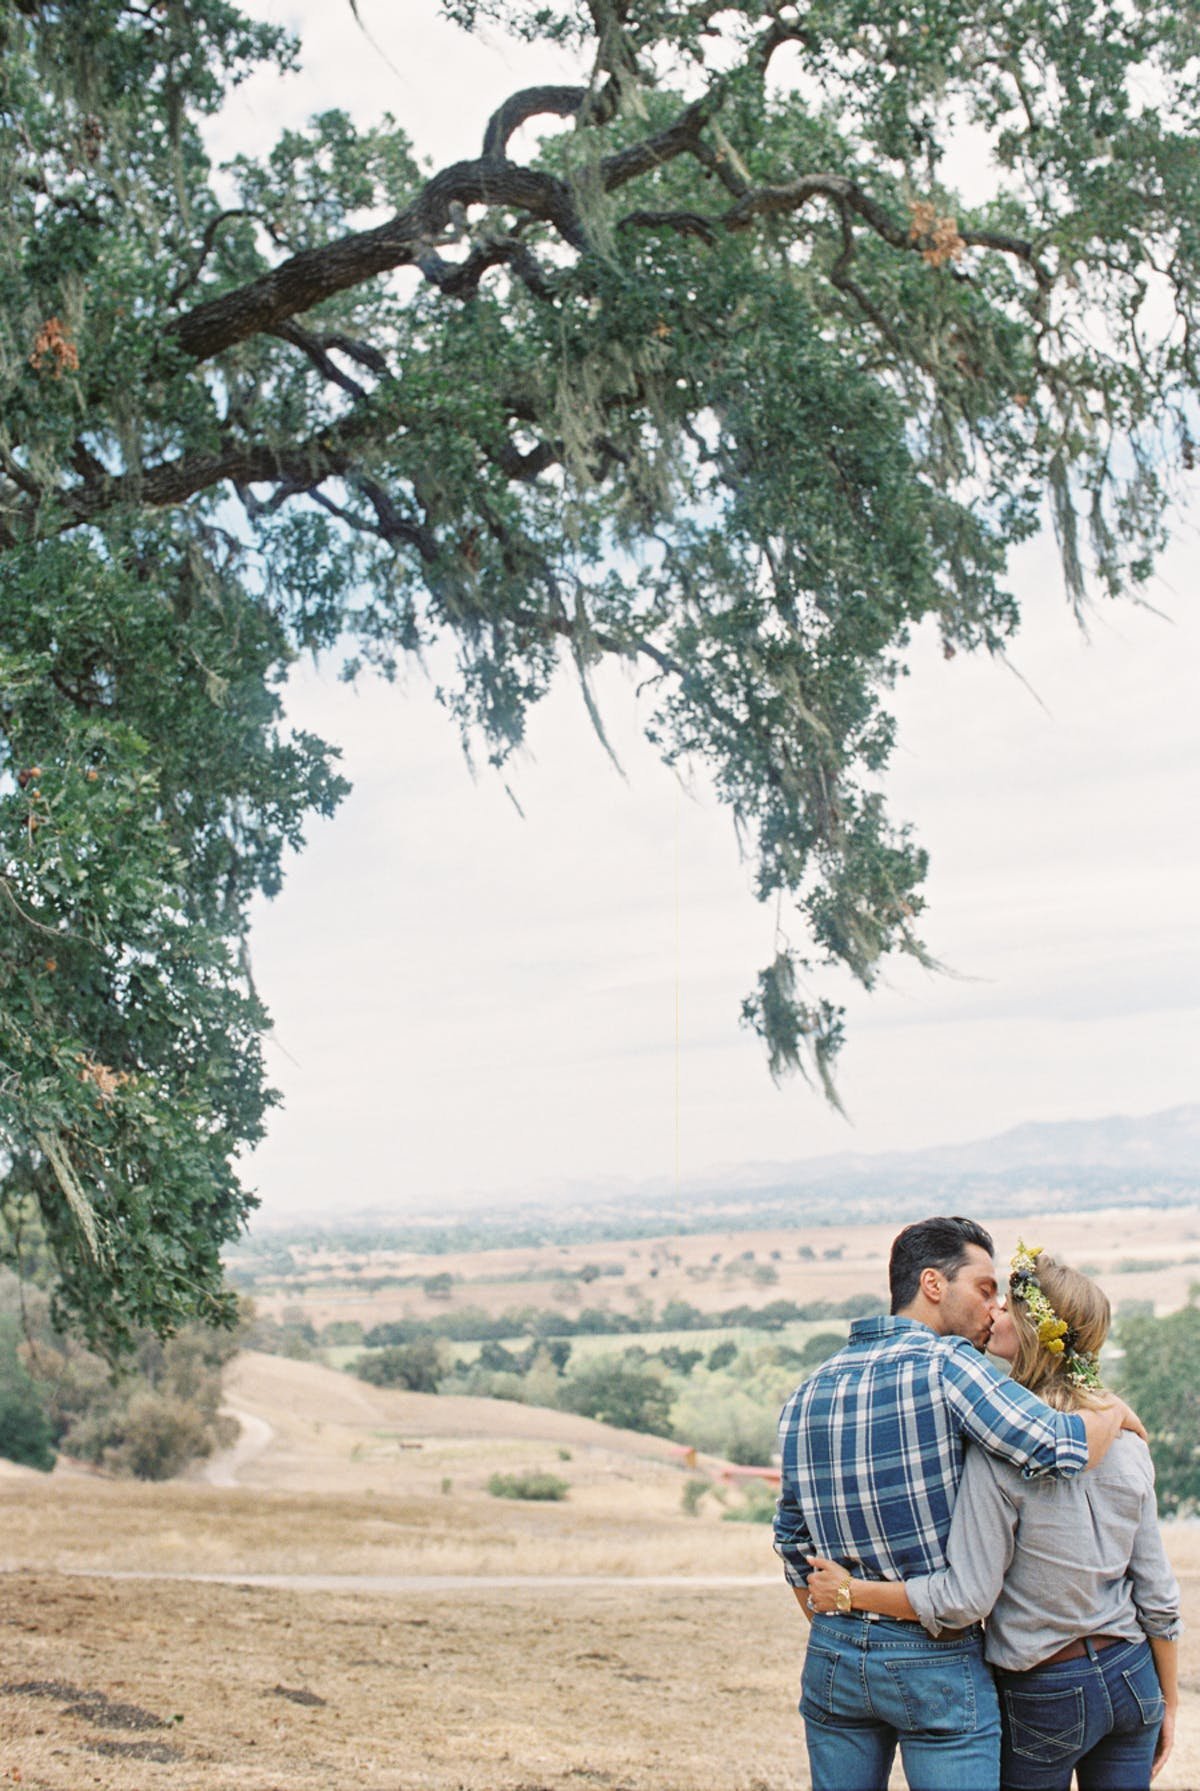 www.santabarbarawedding.com | Michael + Anna Costa Photography | Refugio Ranch | Alegria by Design | Like a Letter Videography | Anna Le Pley Taylor | Couple Embracing